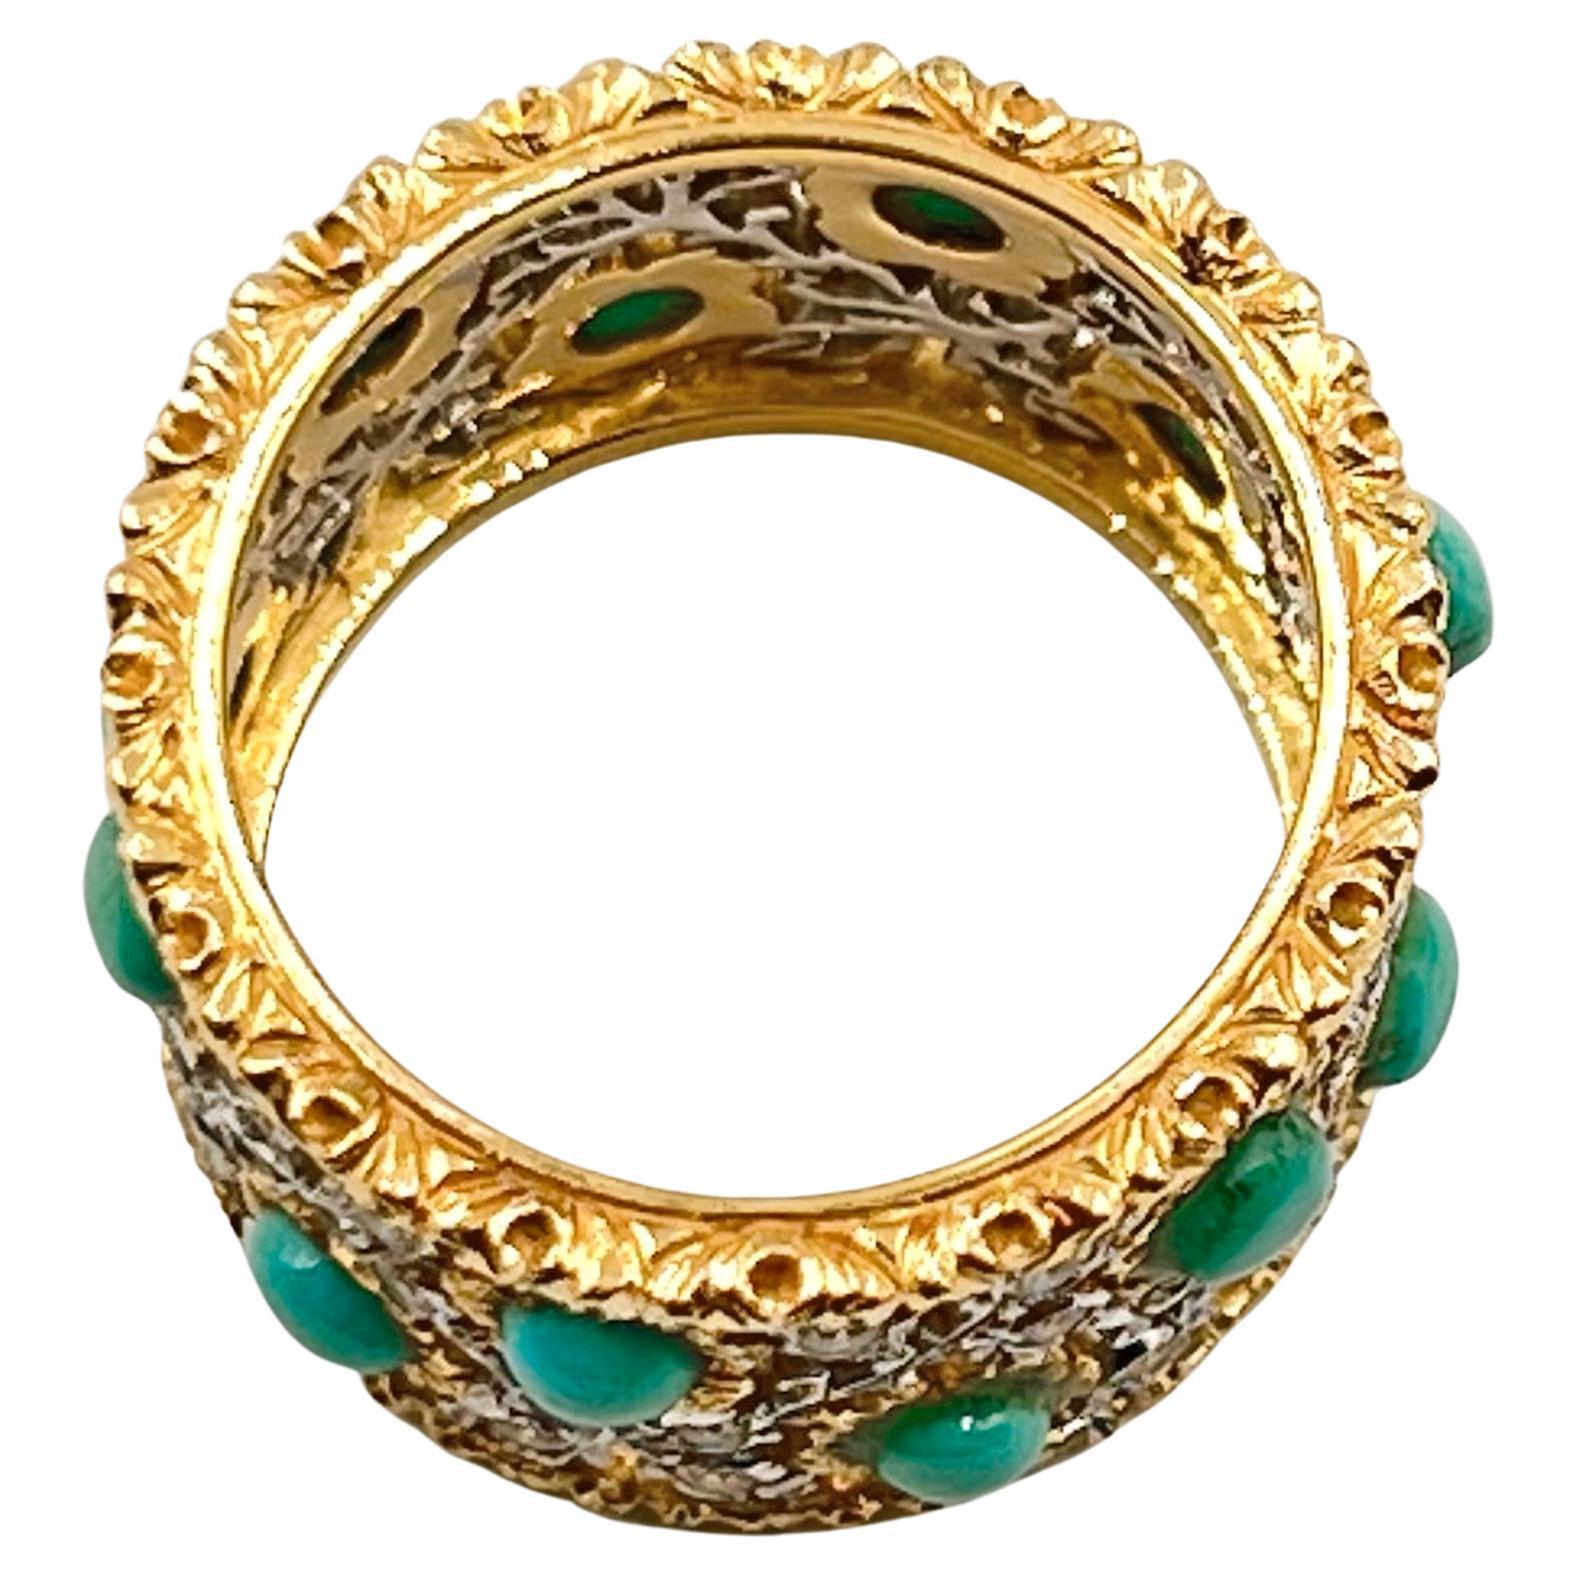 Turquoise and diamond wide band ring, featuring an openwork leaf and flower pattern in 18k white and yellow gold set with small round-cut diamonds and cabochon-cut turquoise. 36 round diamonds weighing approximately 0.36 total carats and twelve